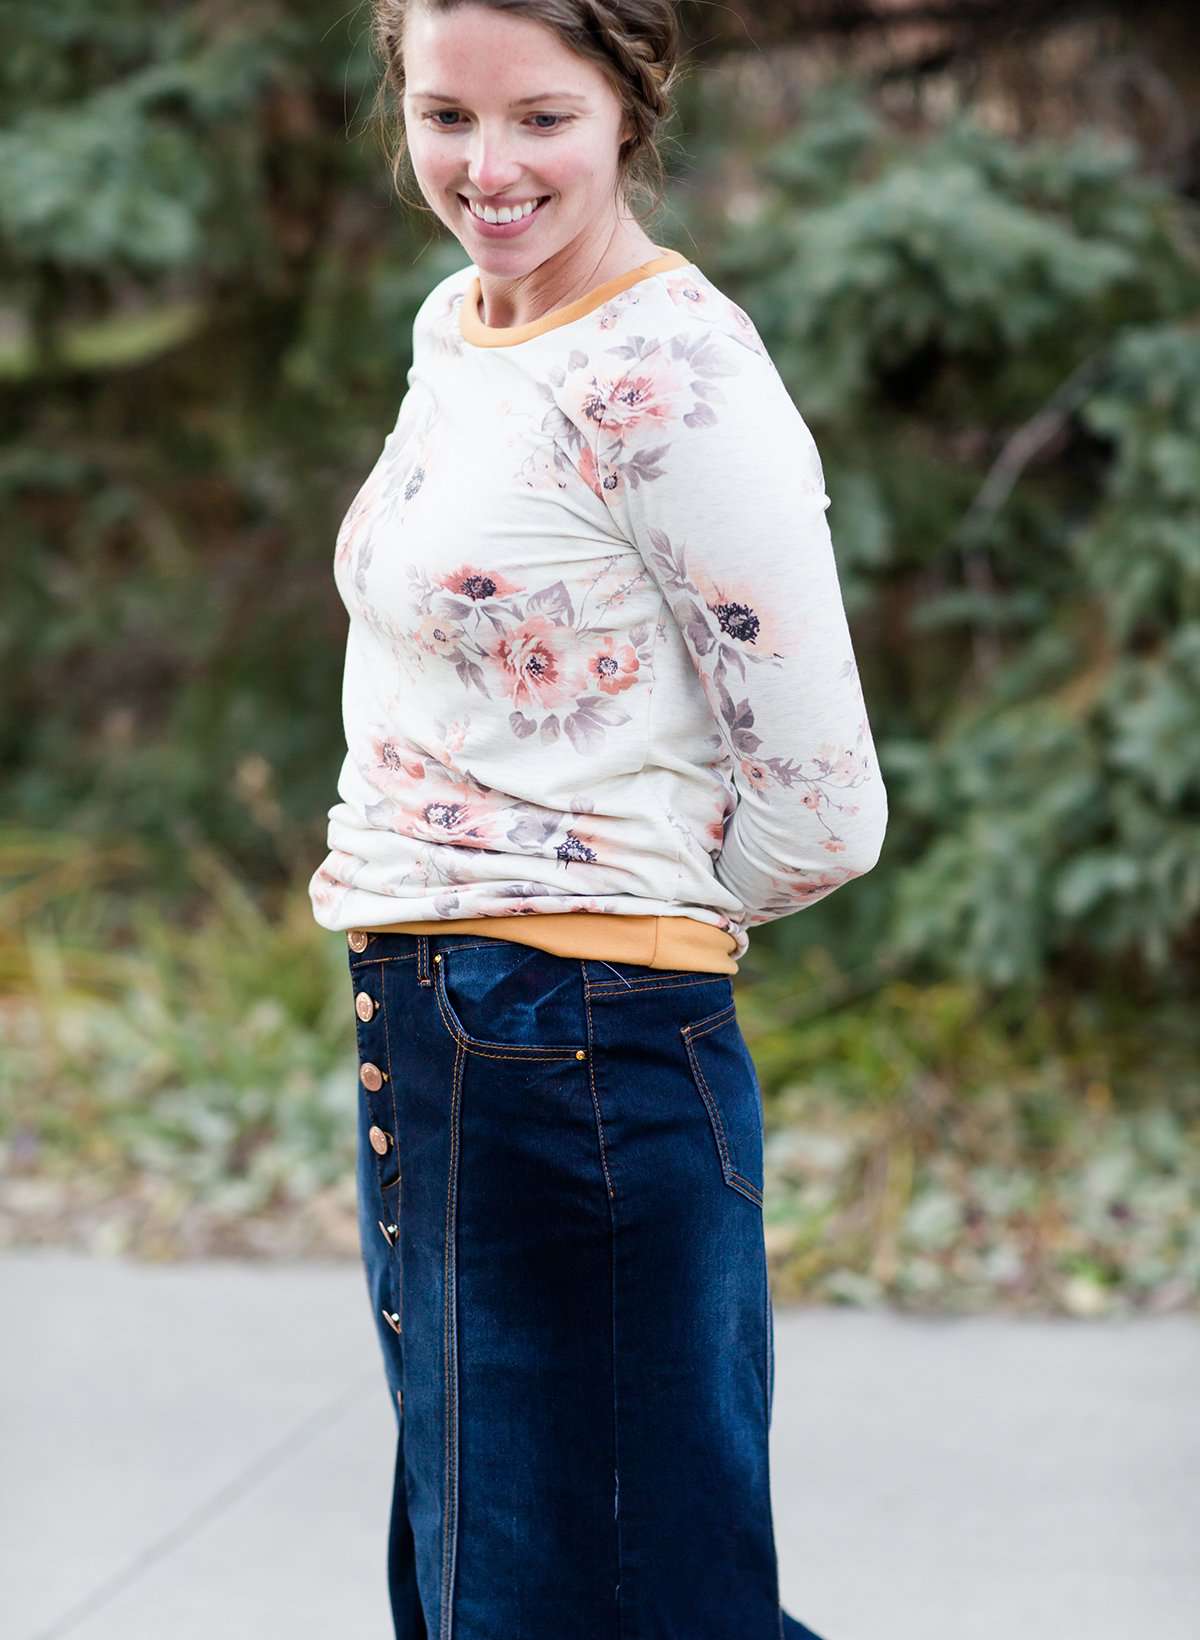 Woman wearing a long denim skirt without a slit that has buttons up the front and is a flare, a-line style.